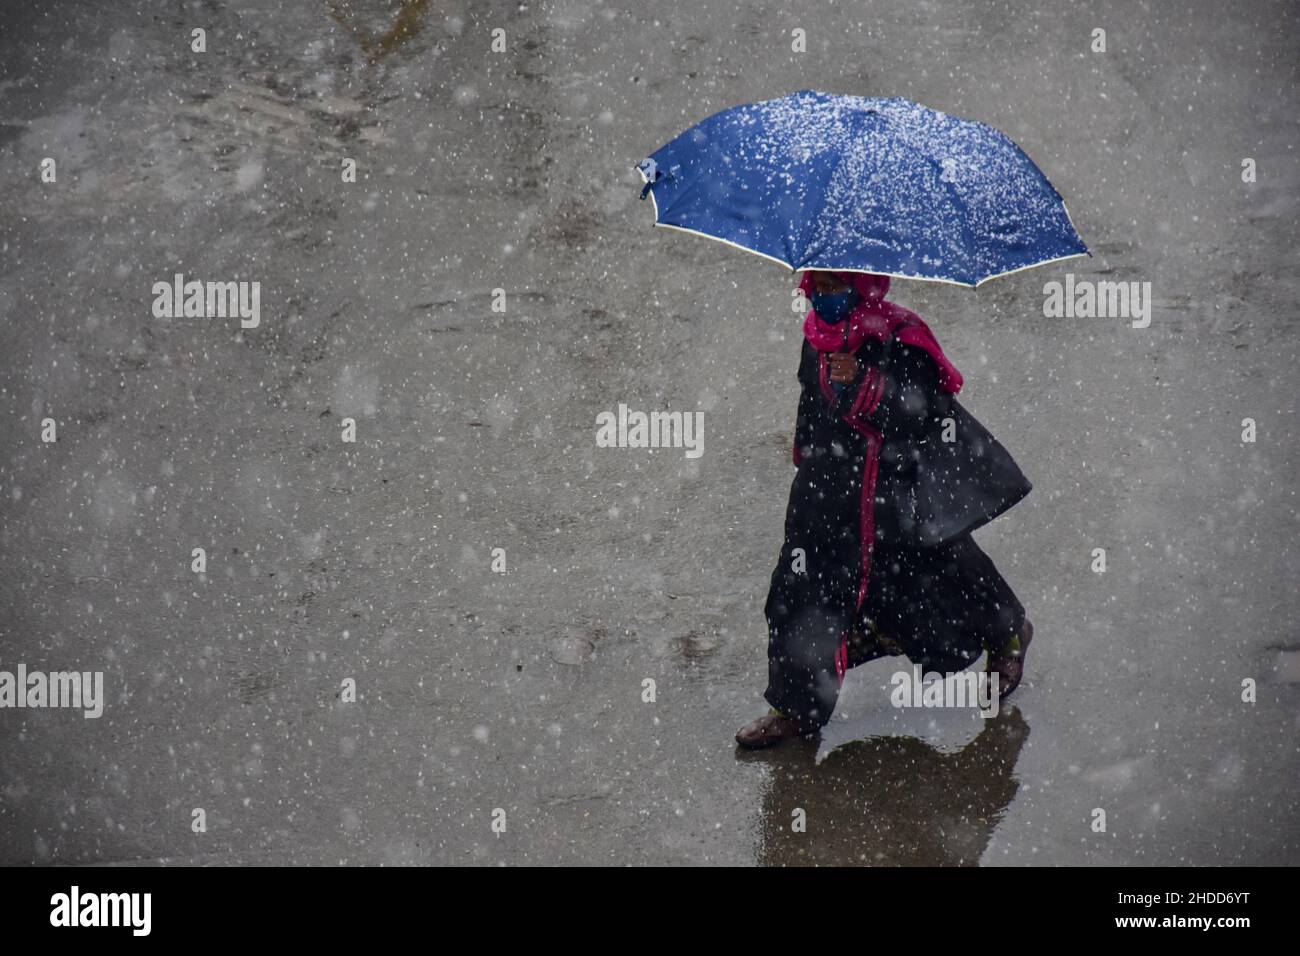 A woman shelters underneath an umbrella during a snowfall in Srinagar. Kashmir has recorded widespread light to moderate rain and snow,  leading to cancellation flights to and from Srinagar ‘international’ airport while several far-flung areas remained cut off on Wednesday. The Meteorological department said that they are expecting a 'heavy snowfall' on the 7th-8th of this month. Stock Photo